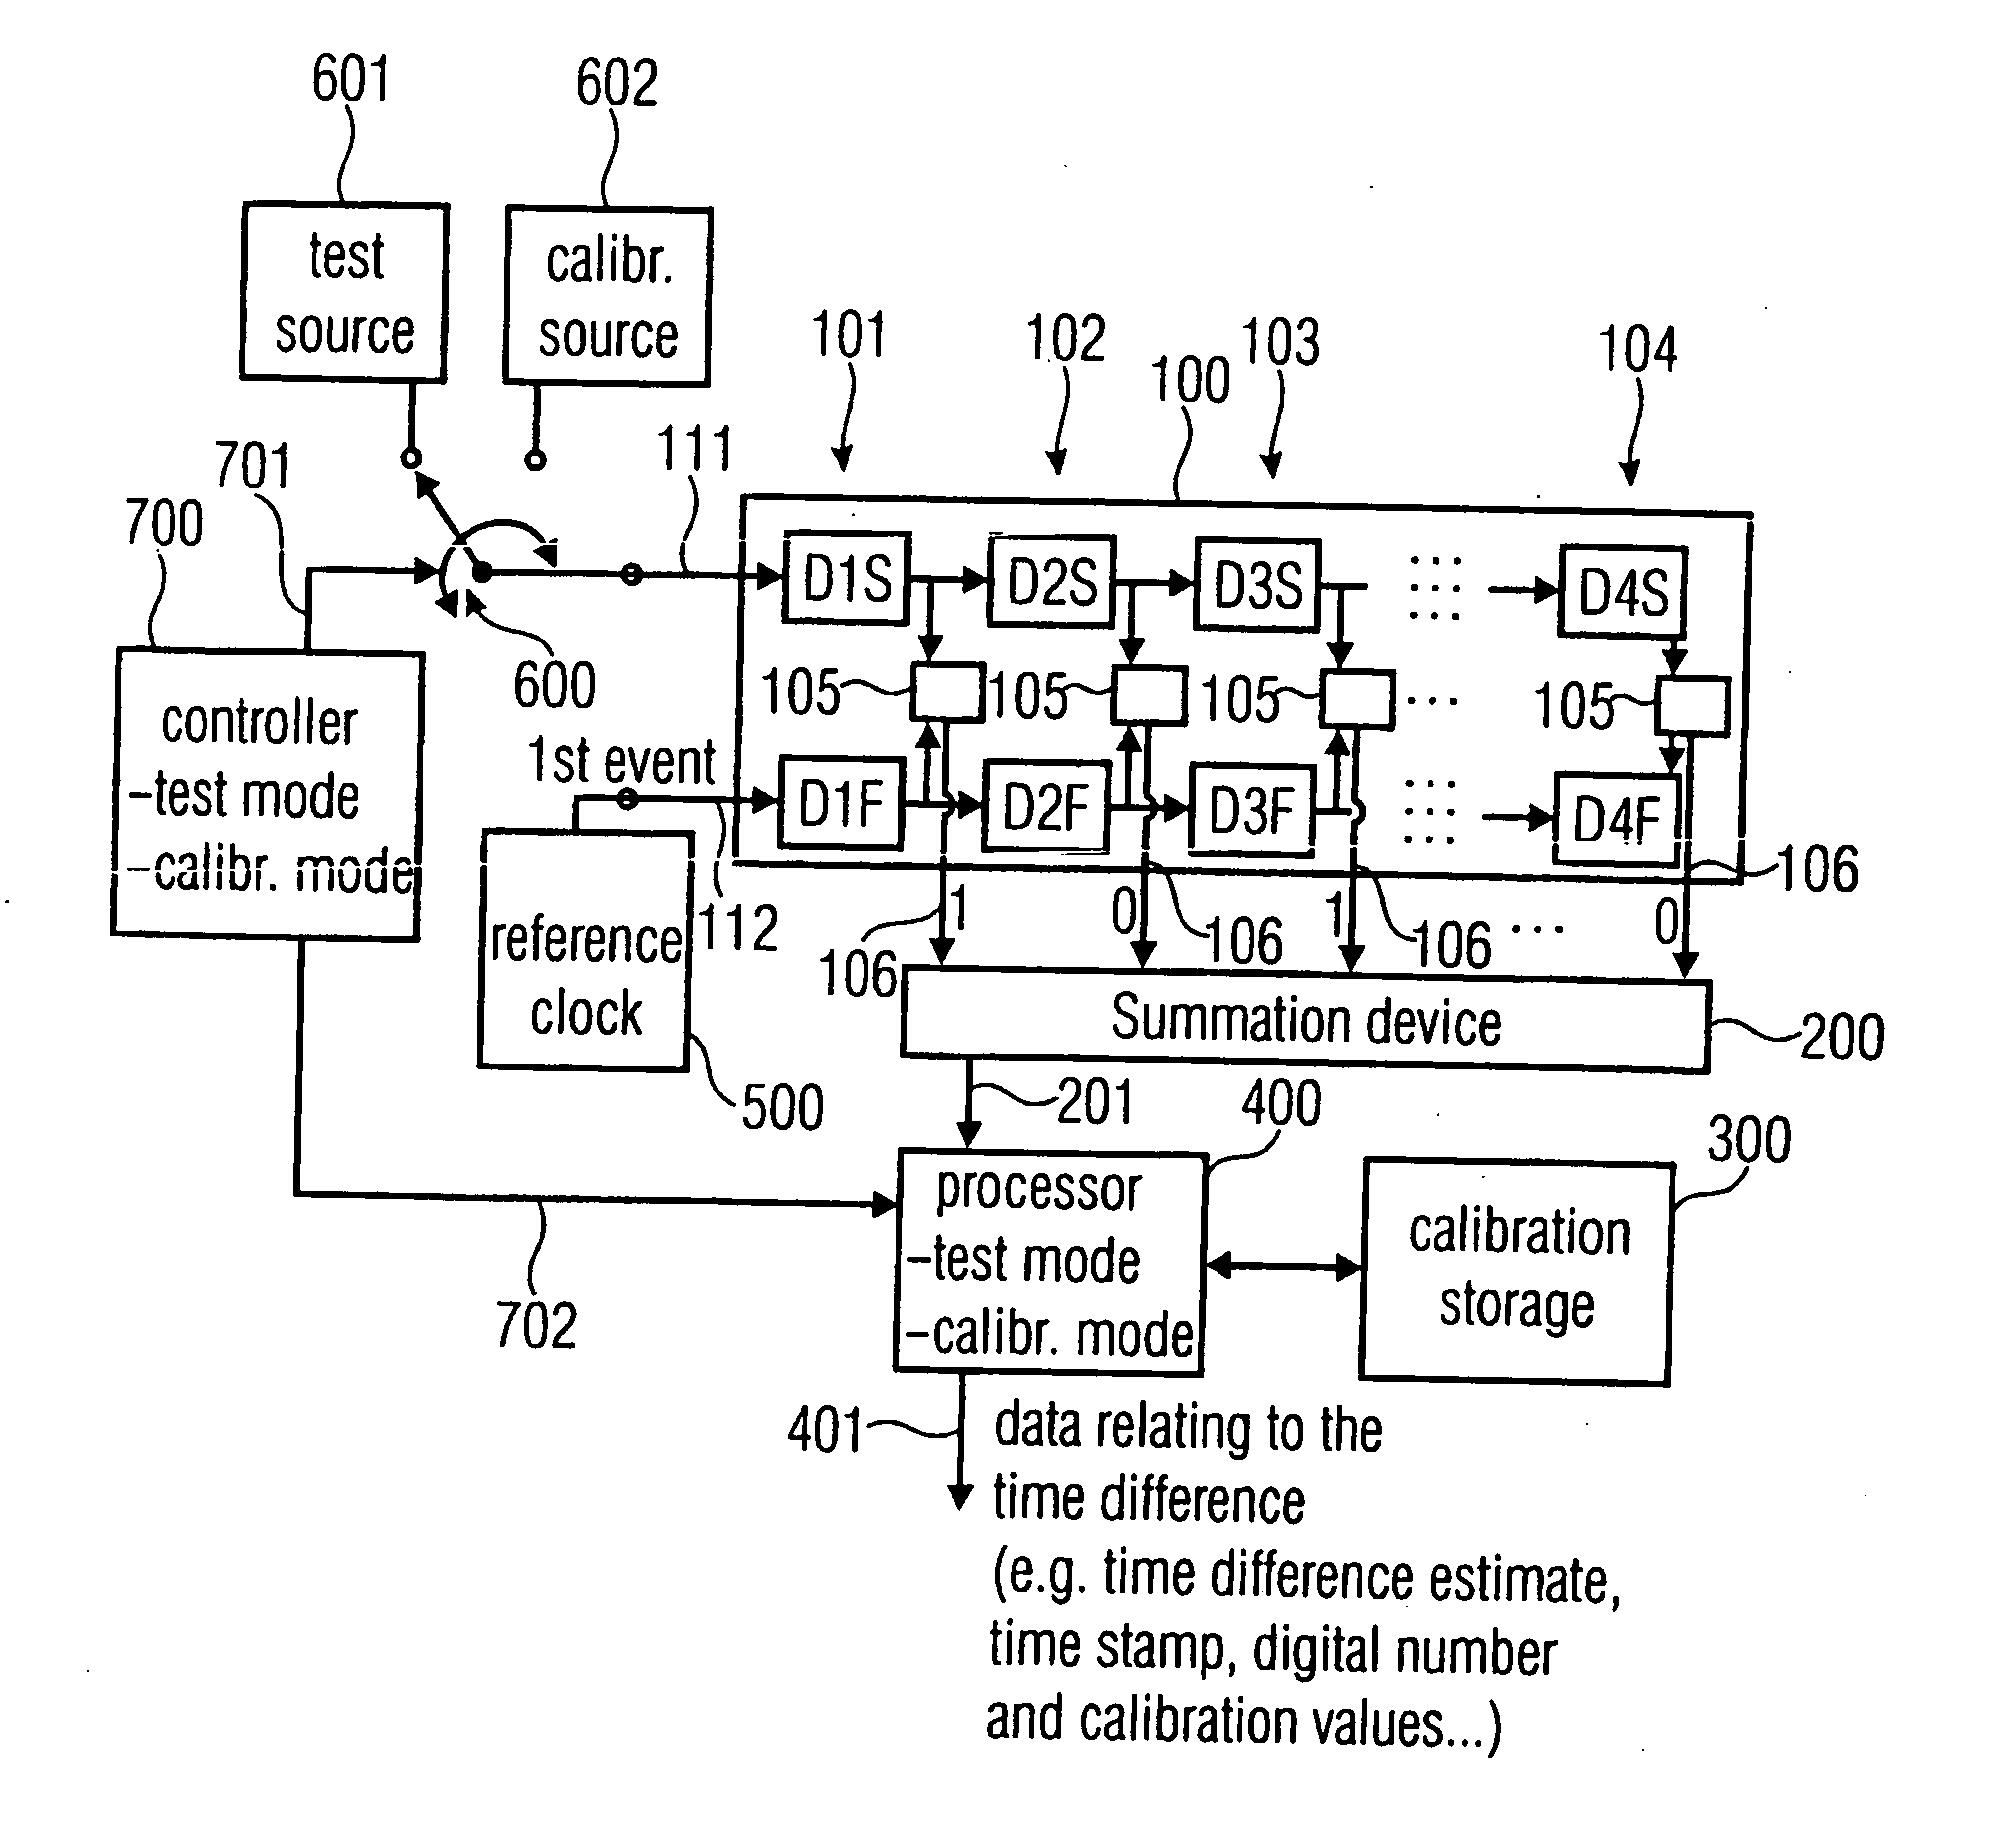 Apparatus and method for estimating data relating to a time difference and apparatus and method for calibrating a delay line